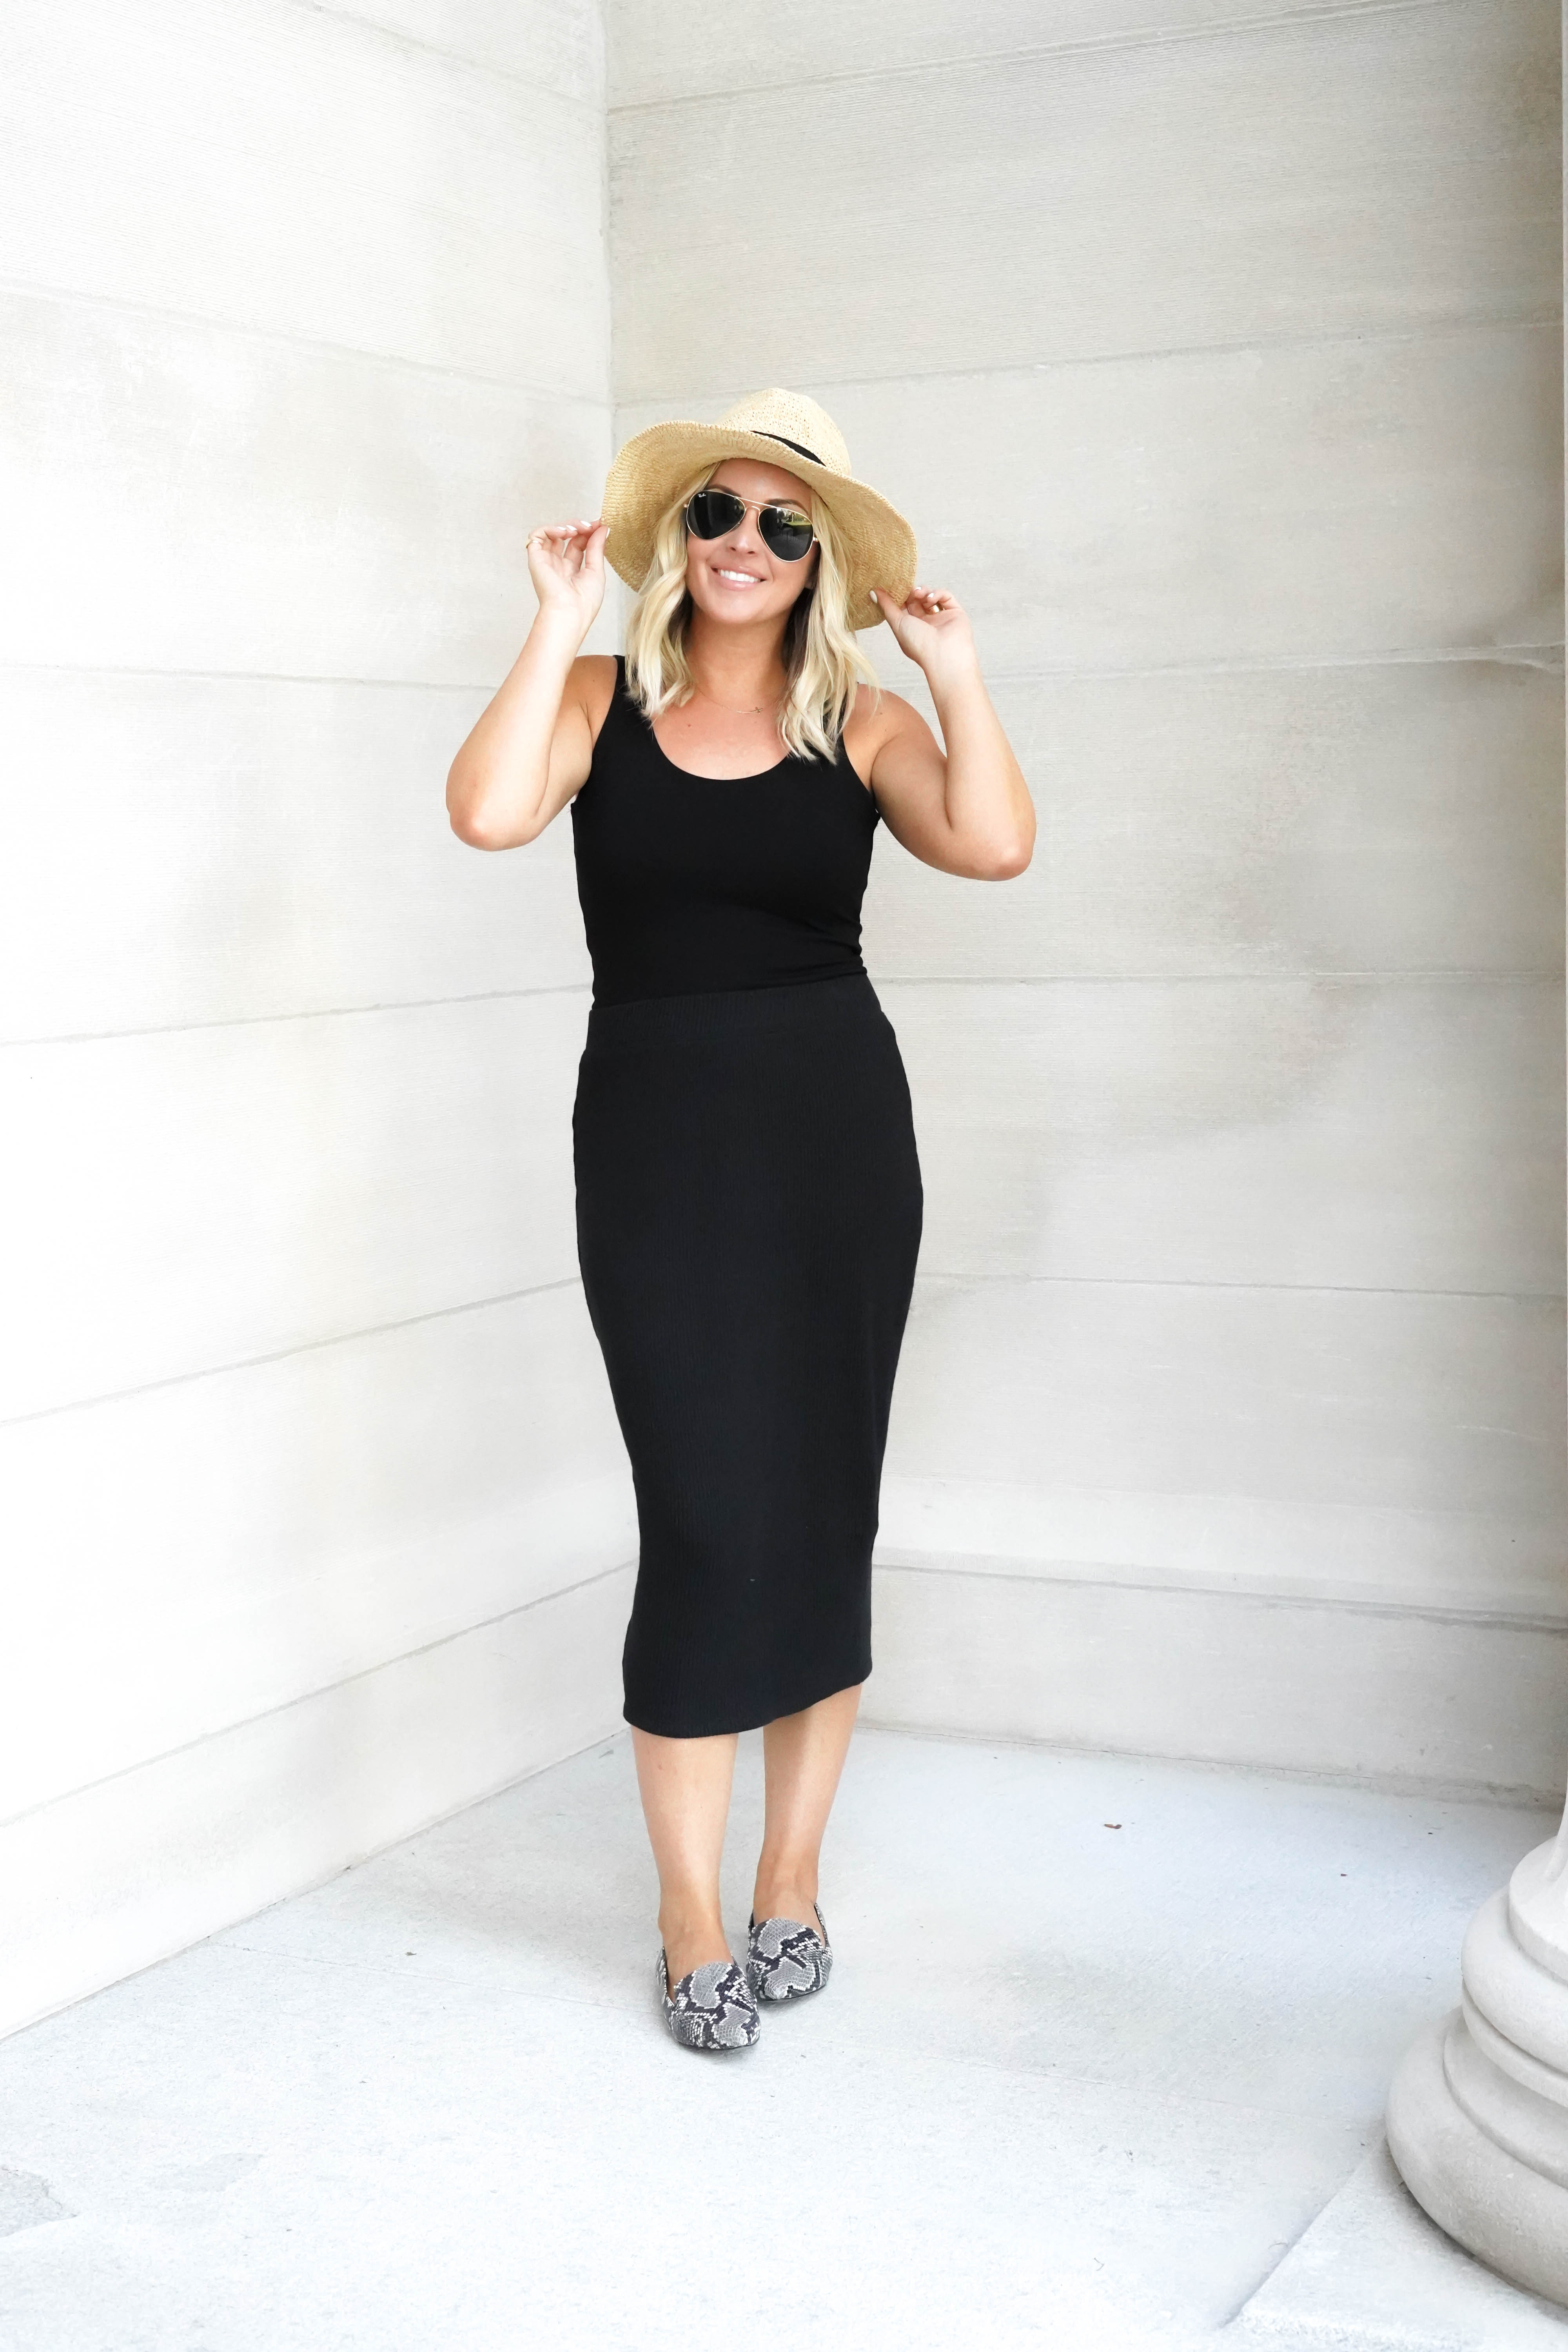 How to Wear Snakeskin This Summer & Confident Twosday Linkup - I do deClaire